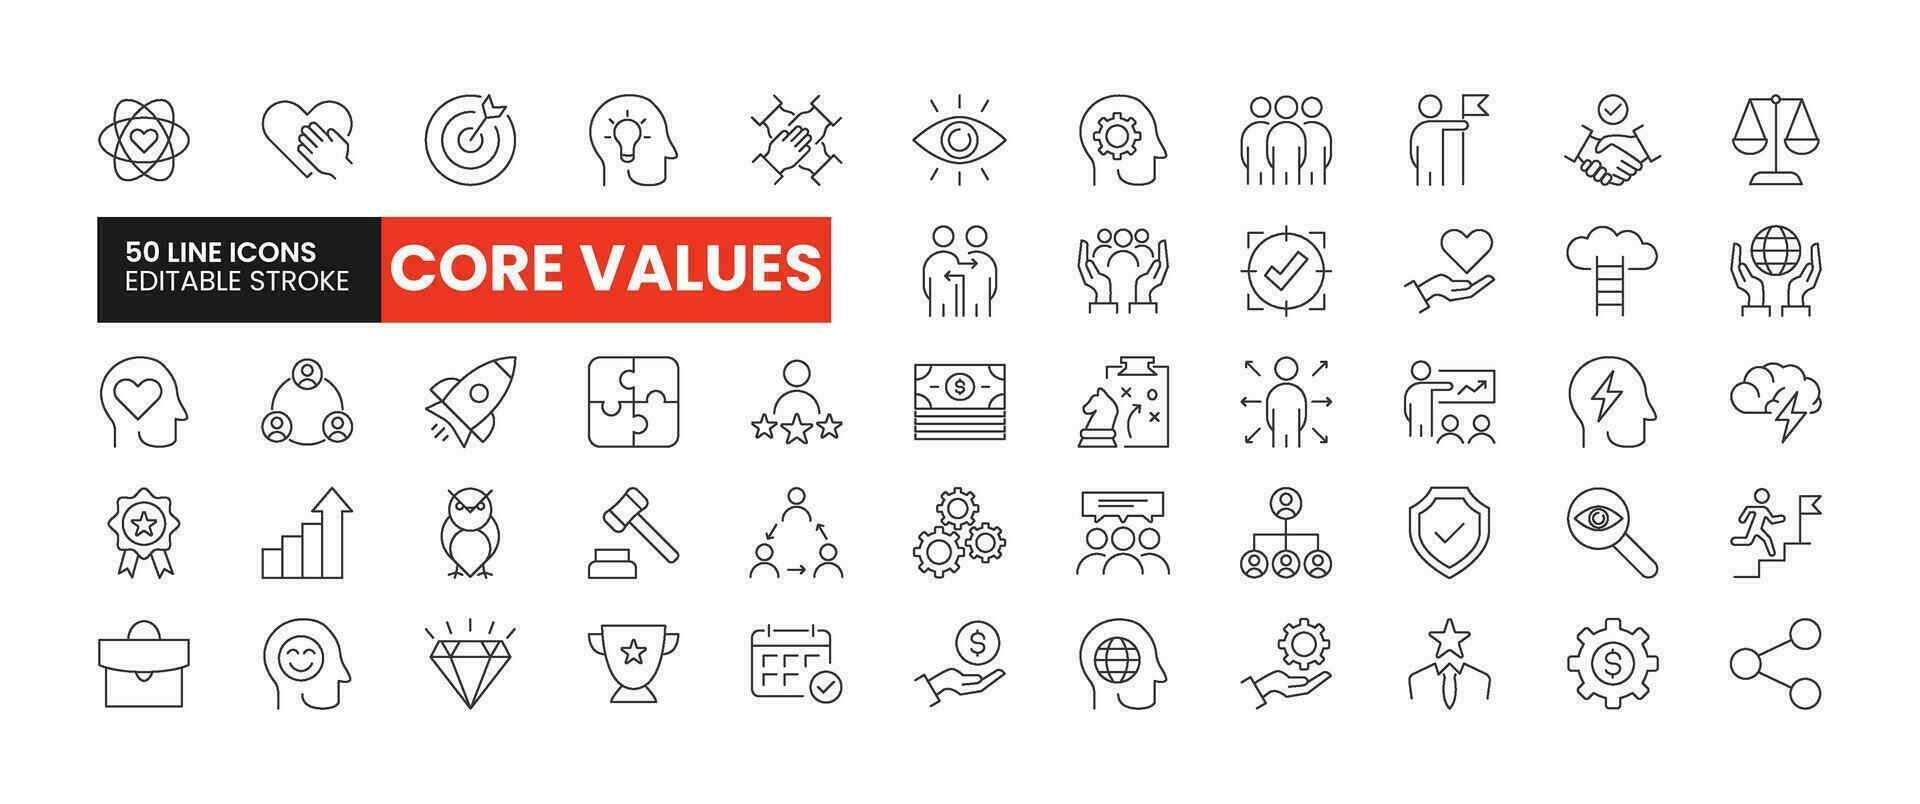 Set of 50 Core Values line icons set. Core Values outline icons with editable stroke collection. Includes Vision, Empathy, Honesty, Social Responsibility, Charity, and More. vector